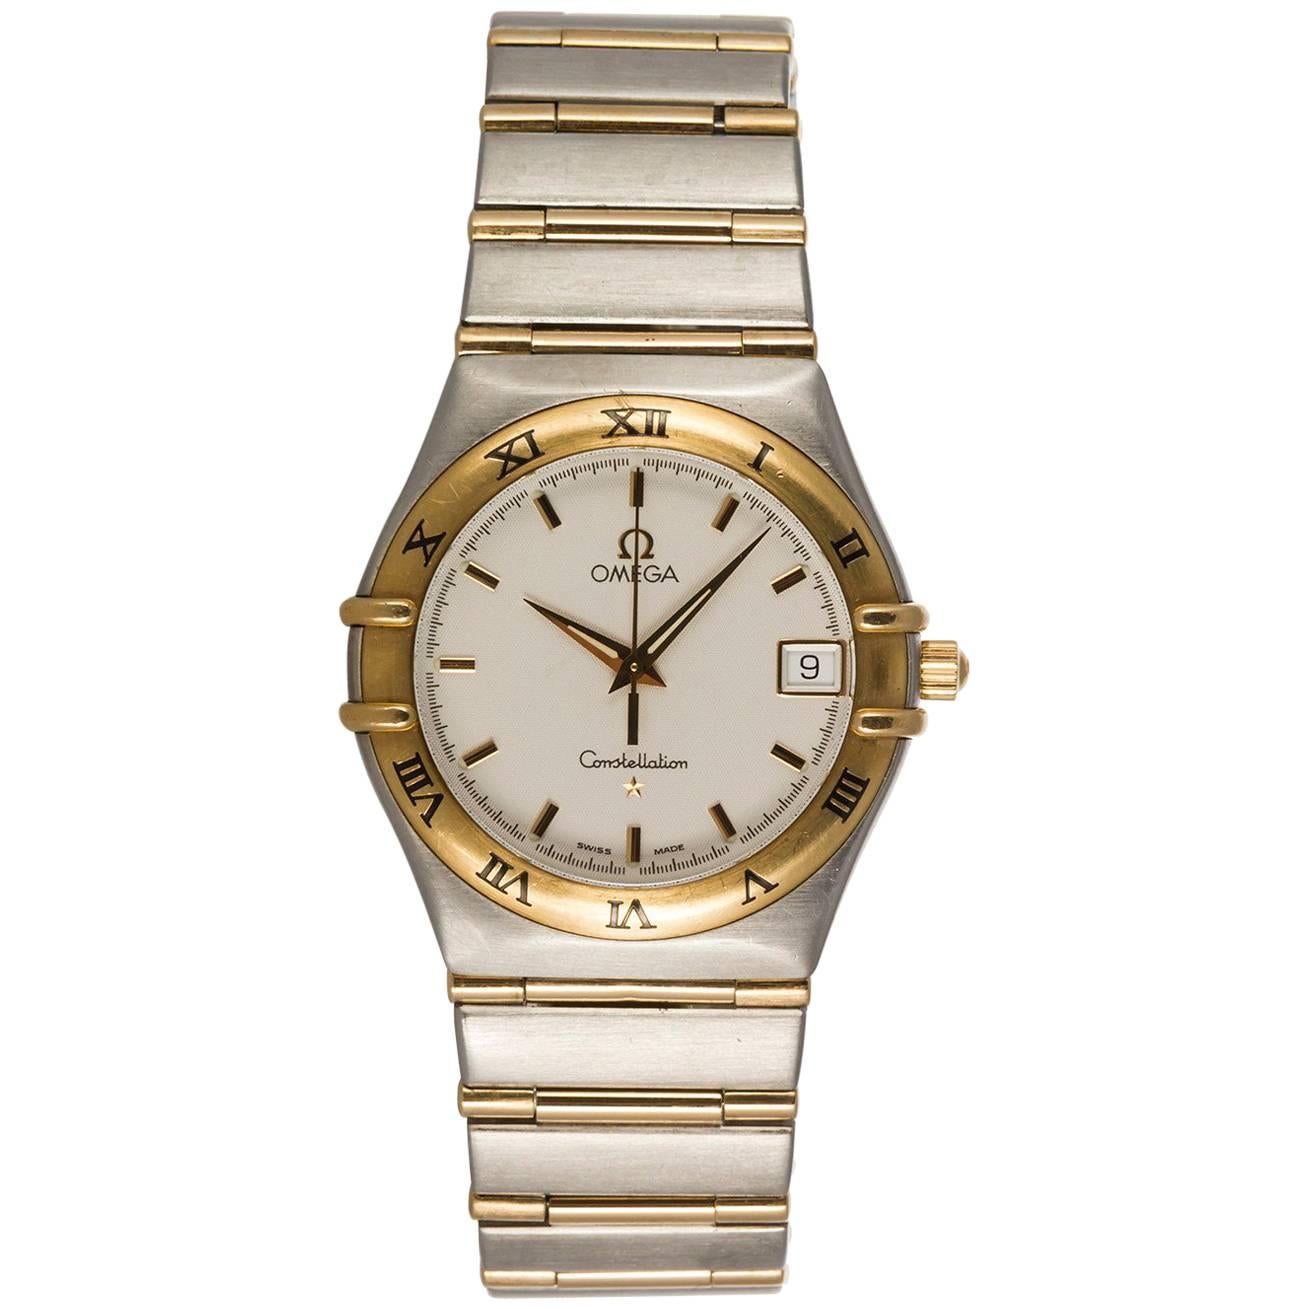 Omega Constellation Two-Tone 18 Karat Gold and Stainless Steel Men's Watch